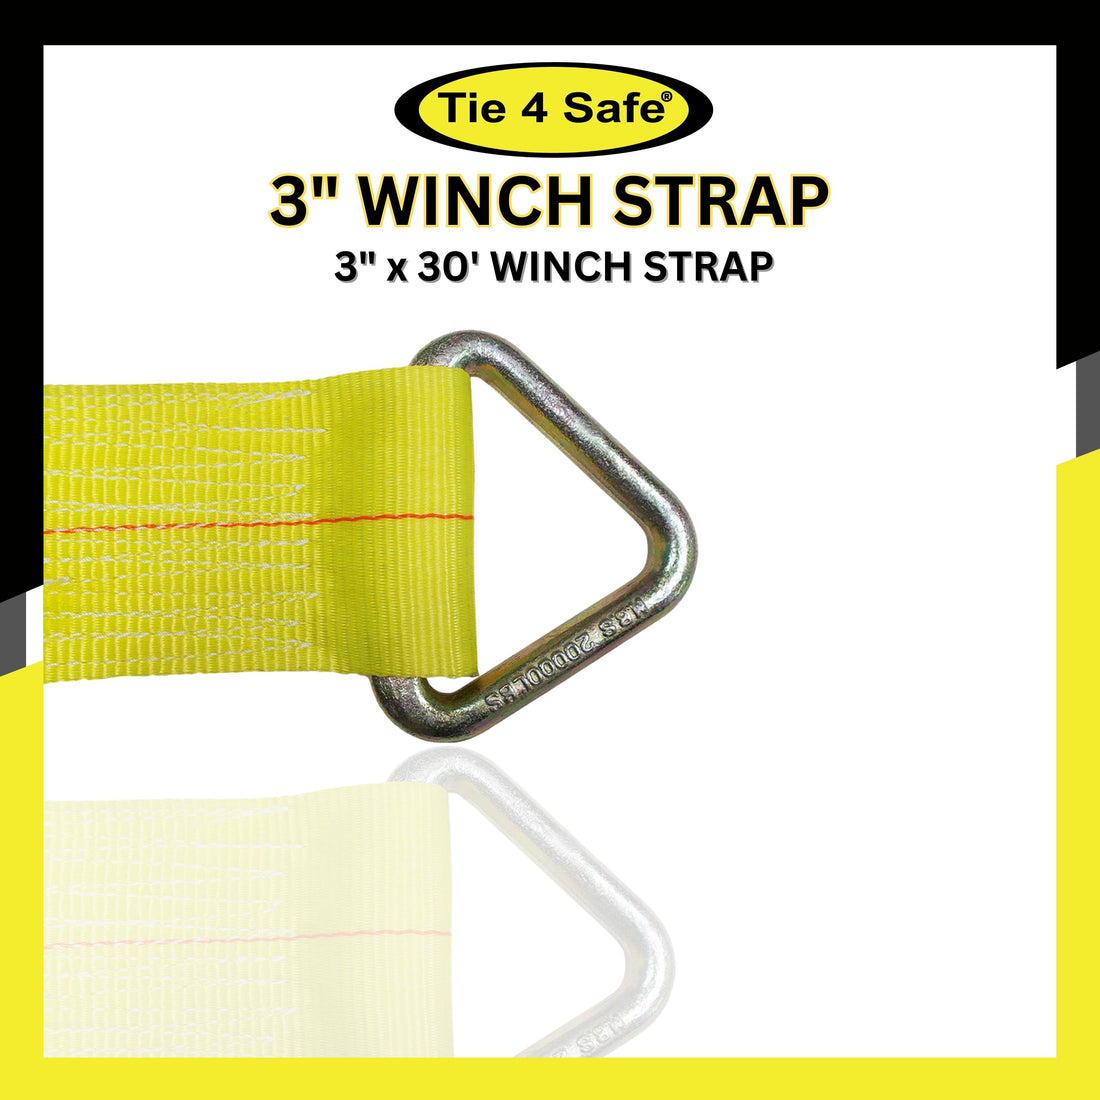 3" x 30' Winch Strap With Delta Ring